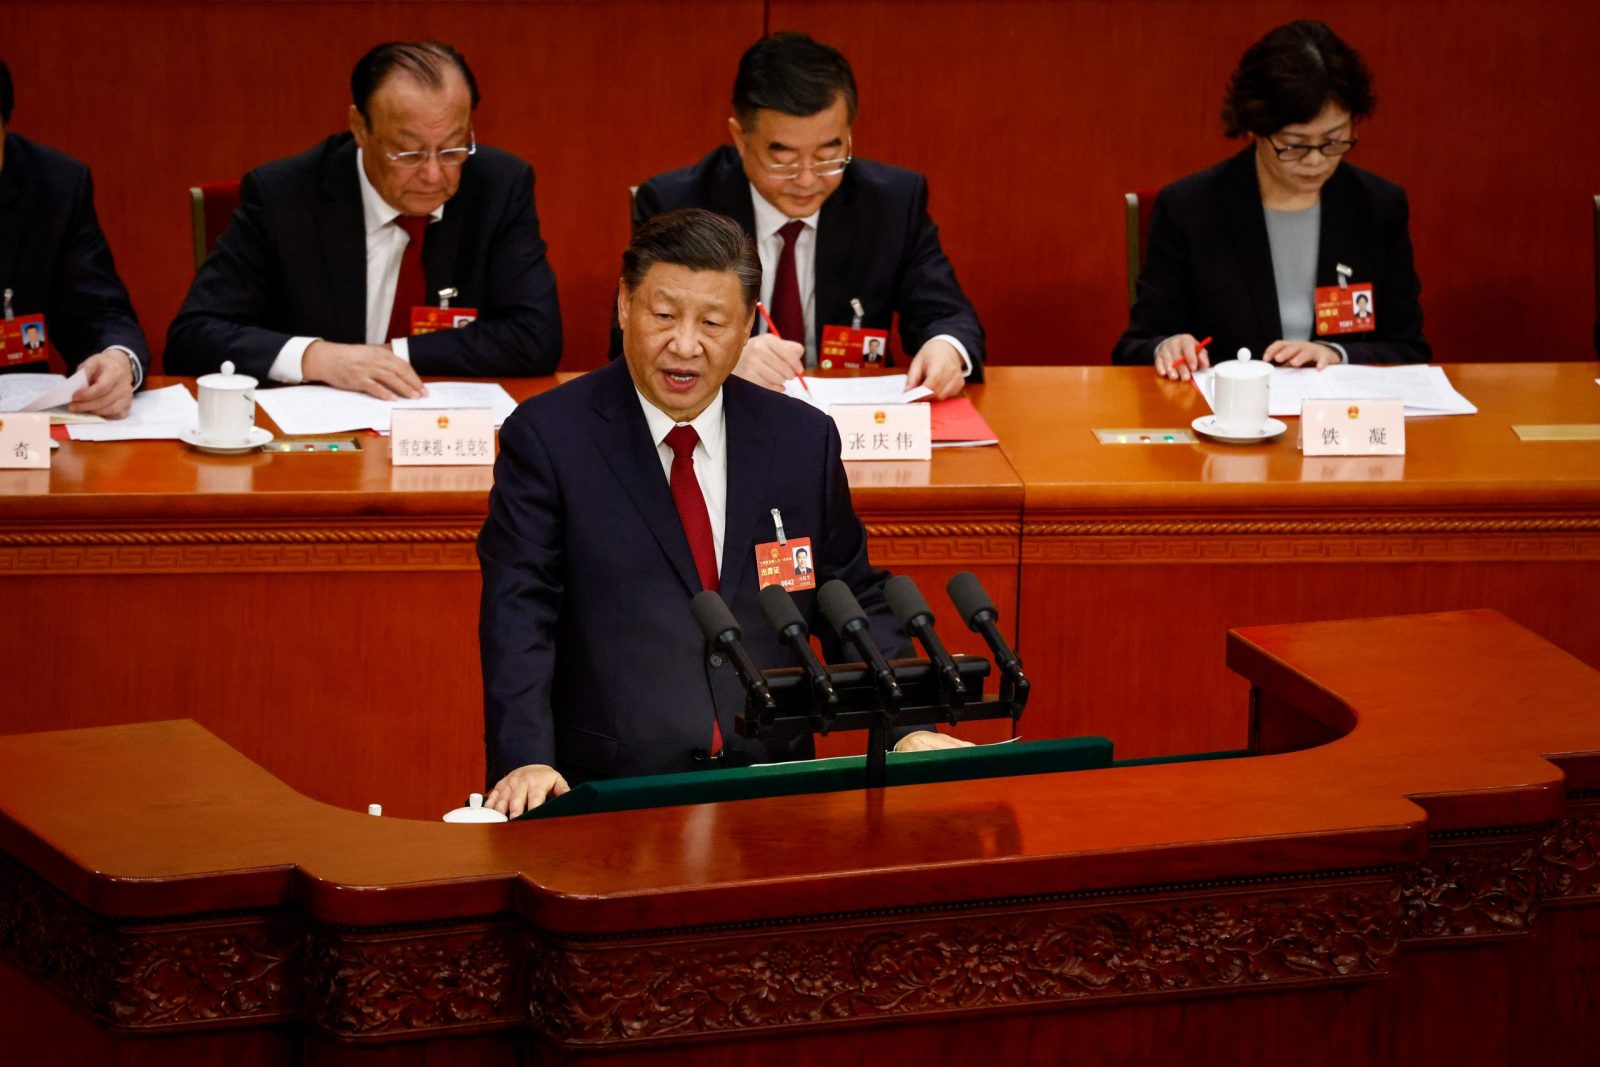 epa10519045 Chinese President Xi Jinping speaks during the Closing Session of the National People's Congress (NPC) at the Great Hall of the People, in Beijing, China, 13 March 2023. China holds two major annual political meetings, the National People's Congress (NPC) and the Chinese People's Political Consultative Conference (CPPCC) which run alongside and together are known as 'Lianghui' or 'Two Sessions'.  EPA/MARK R. CRISTINO